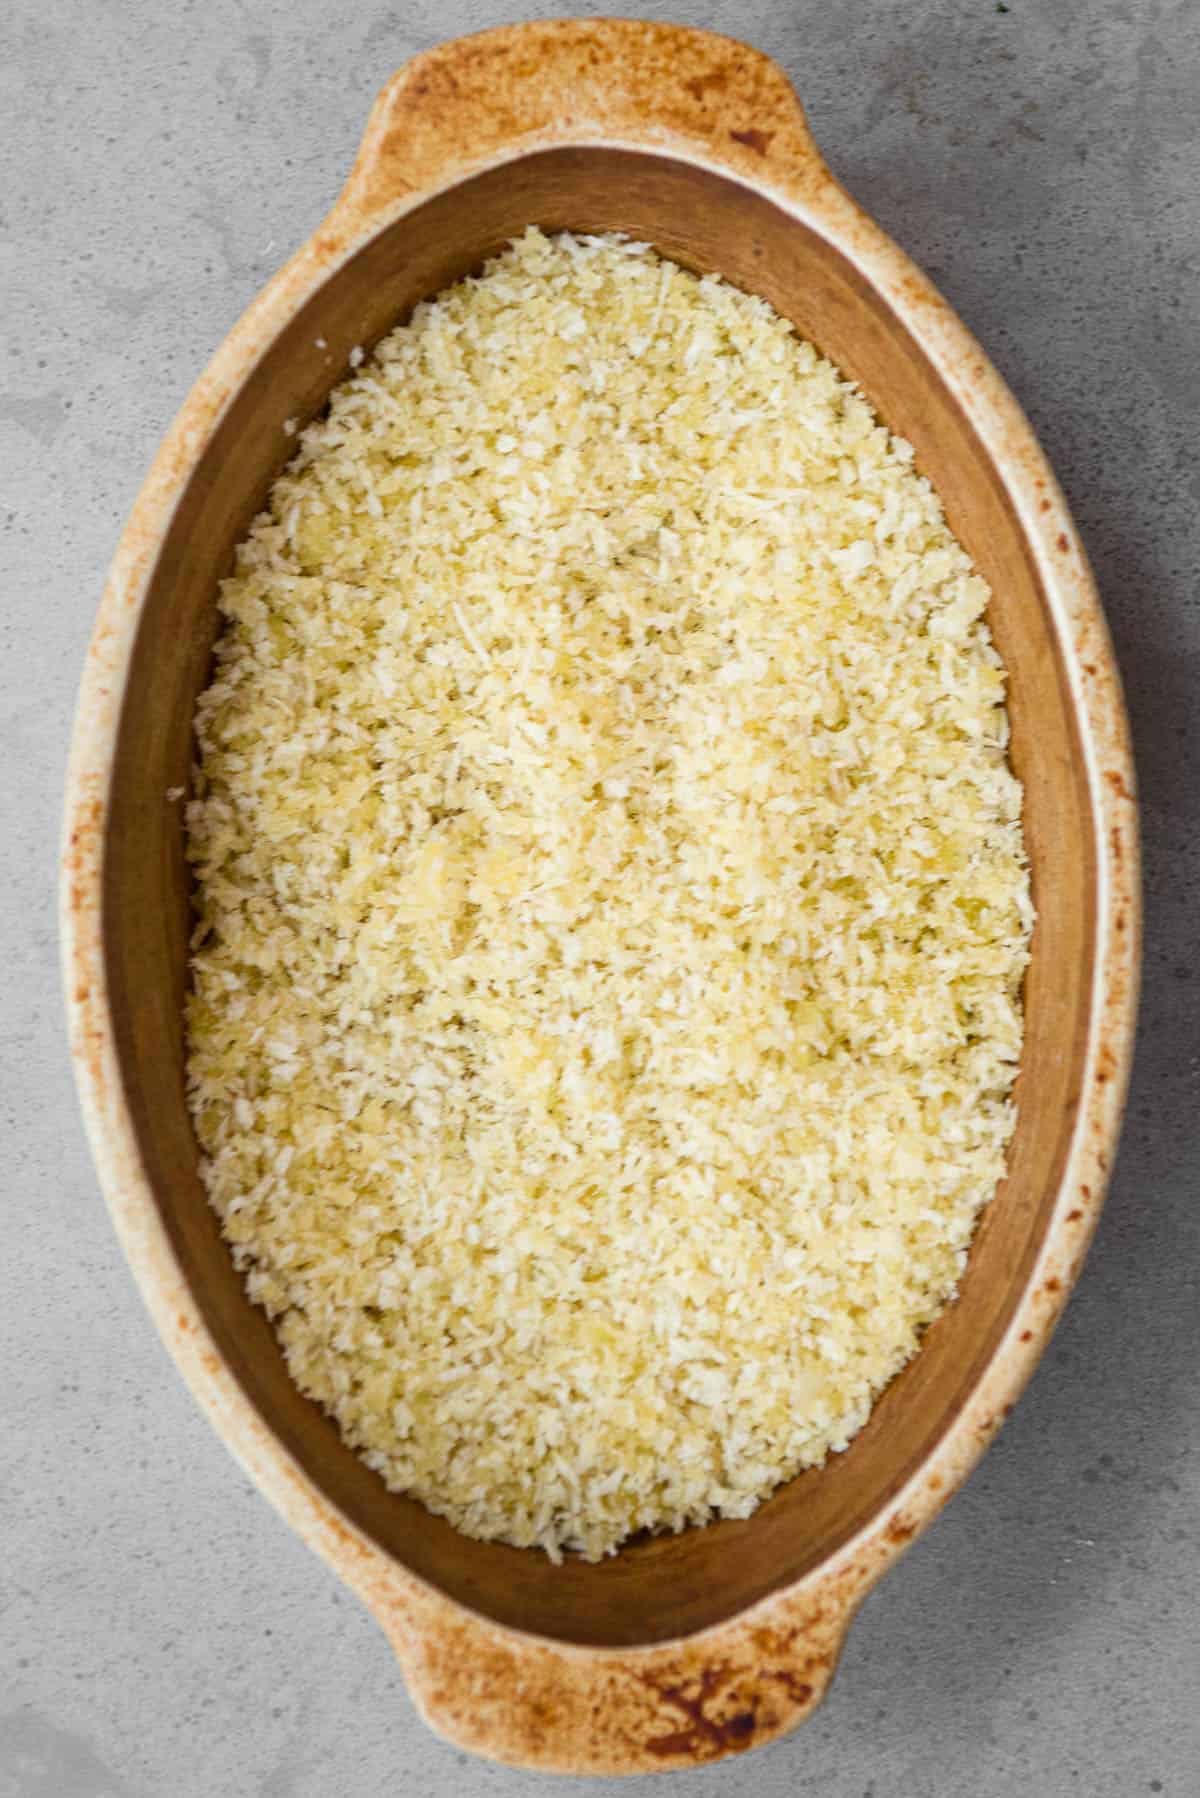 panko bread crumbs tossed in olive oil in oval dish